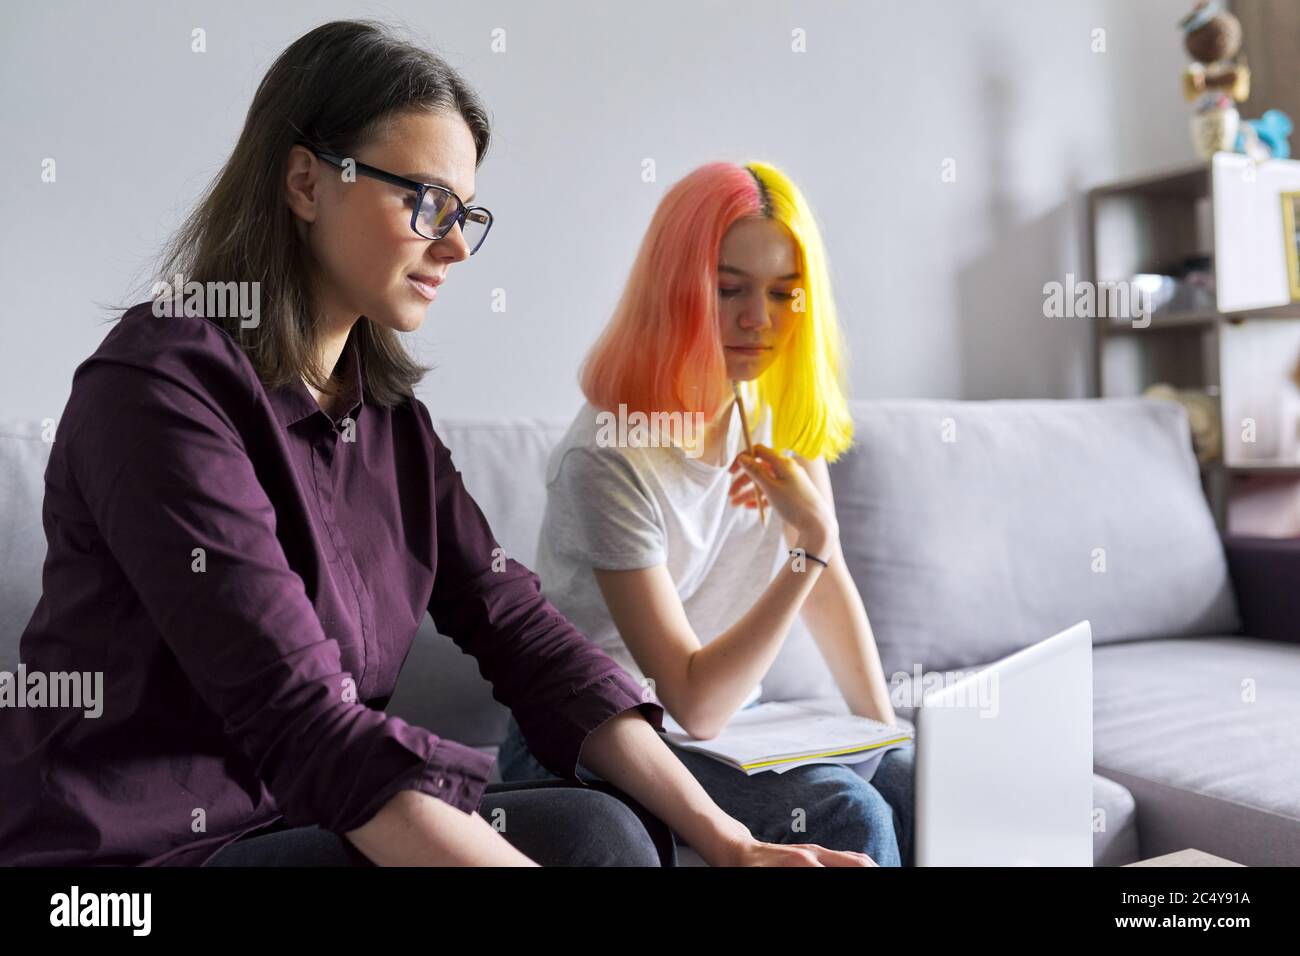 Teen student girl 15, 16 years old has individual lesson from young woman teacher Stock Photo